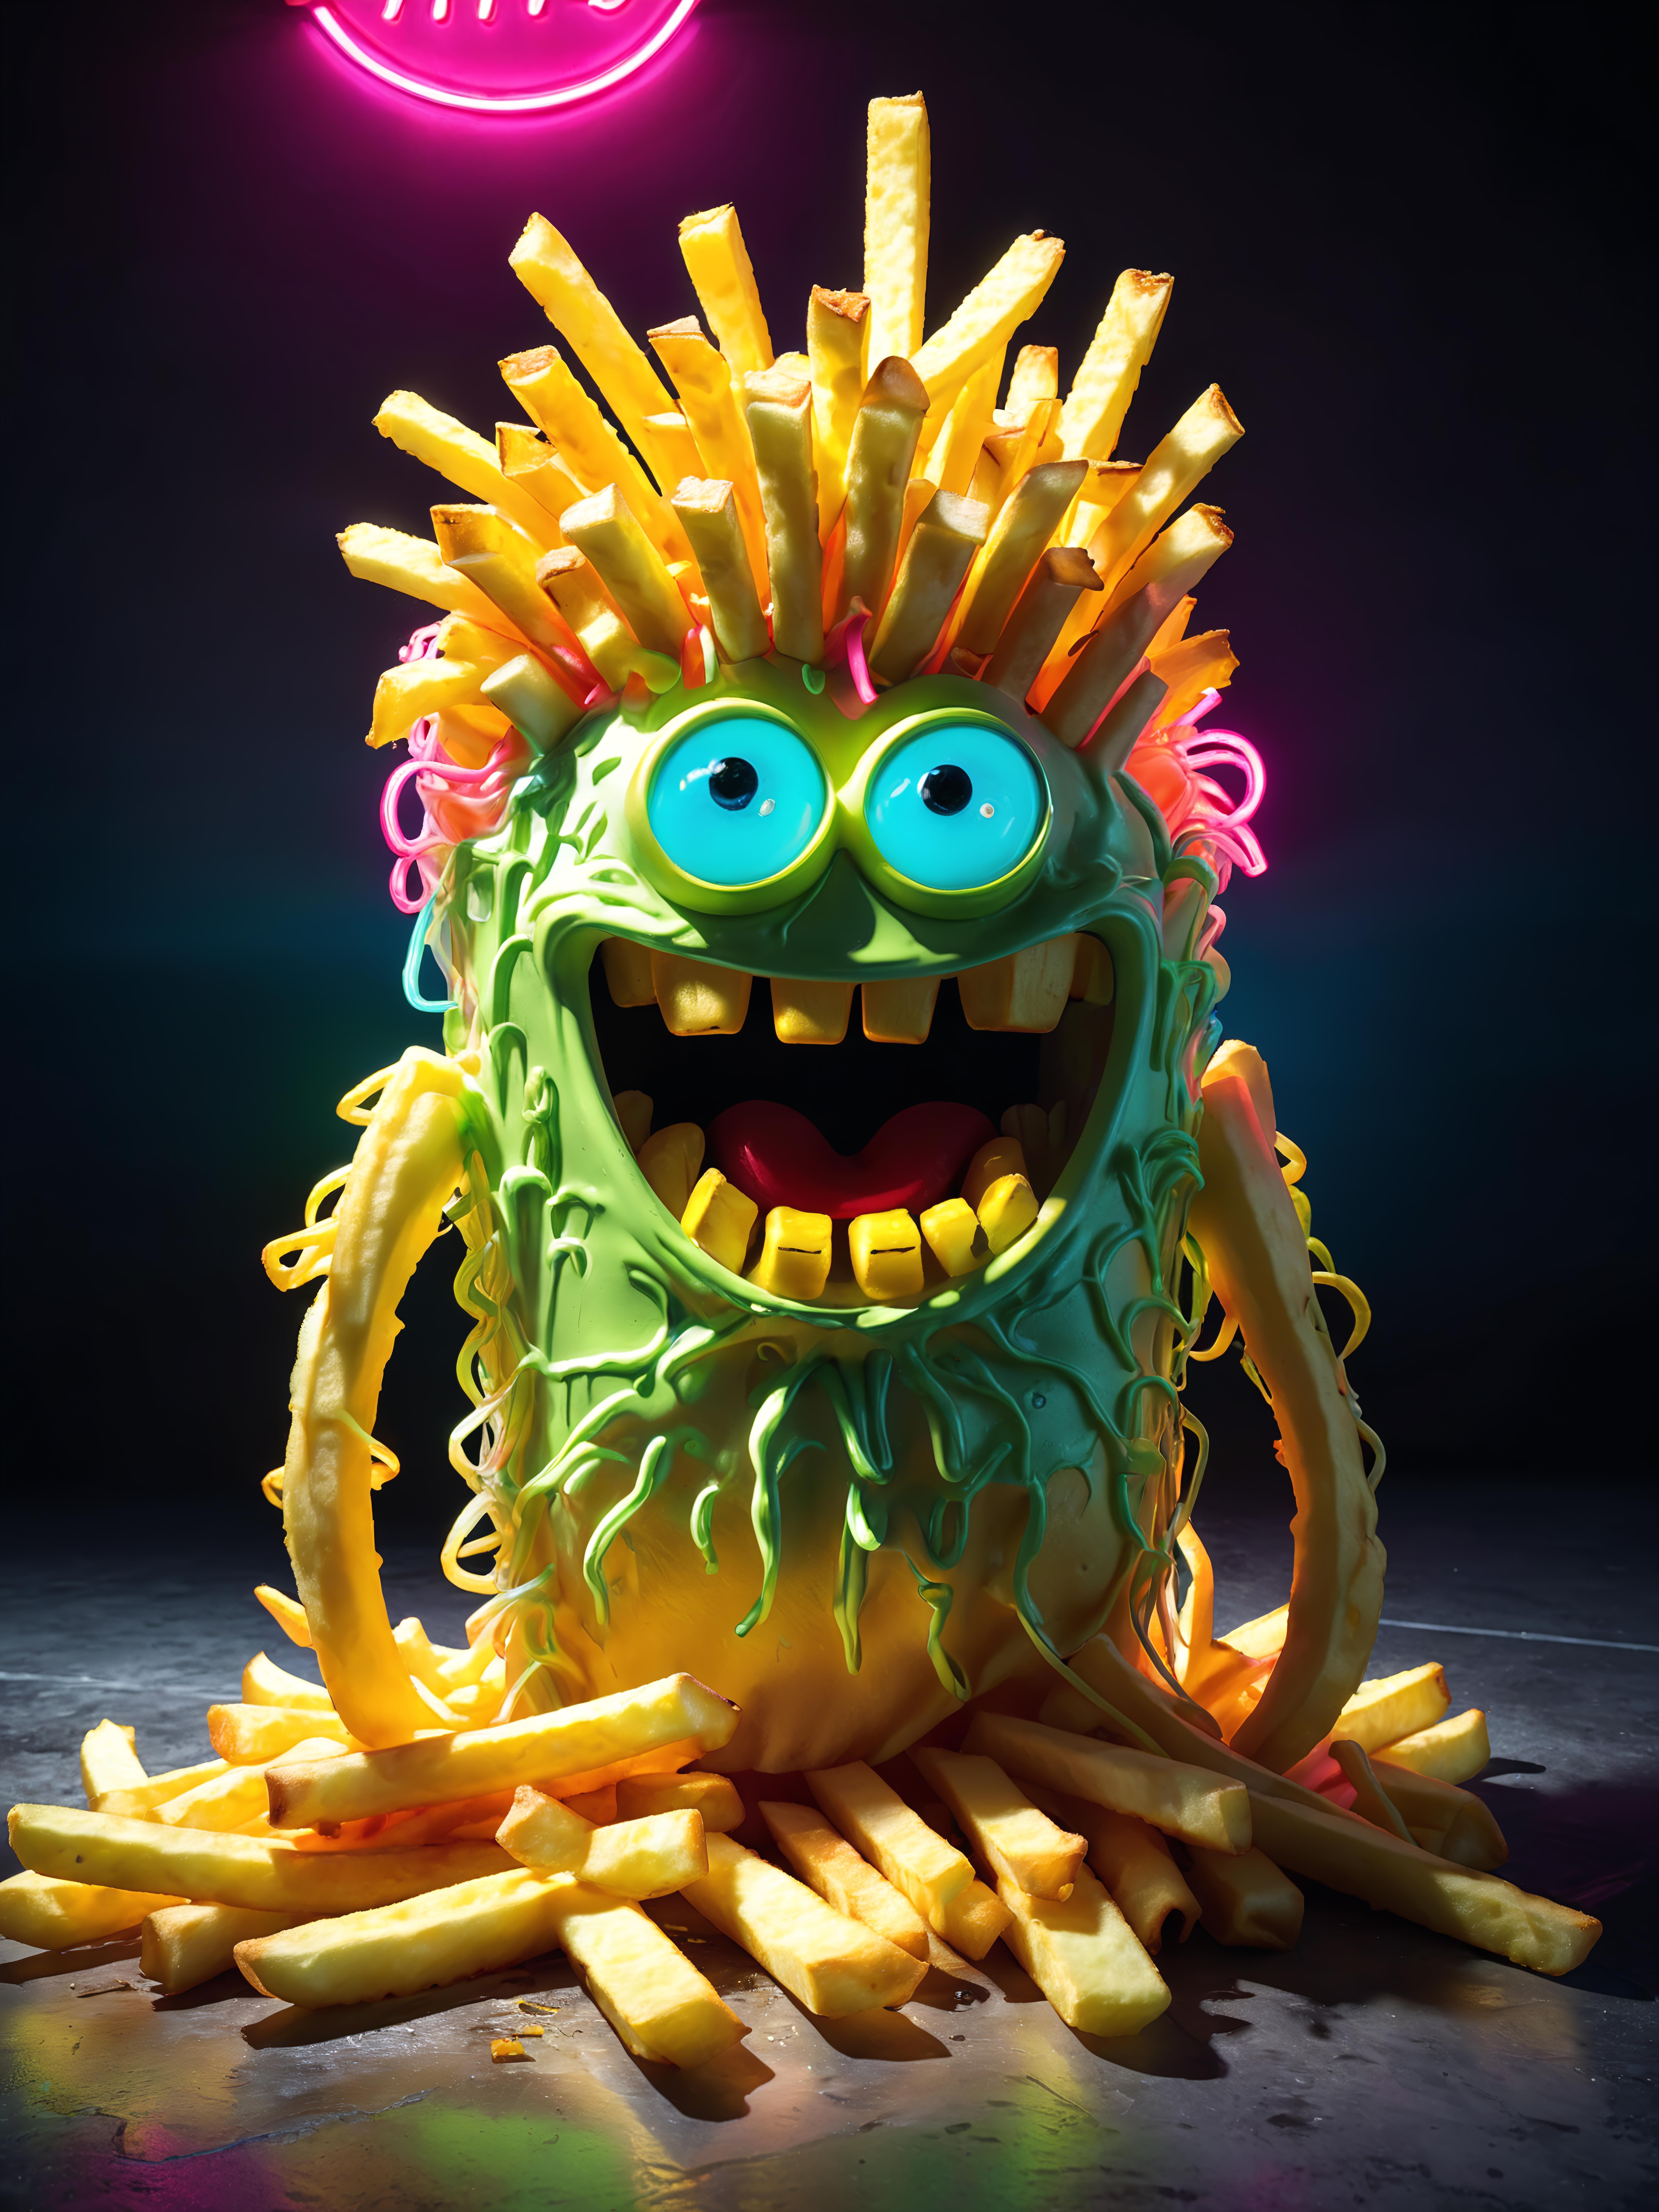 A funny looking monster with a mouth full of teeth made of french fries.